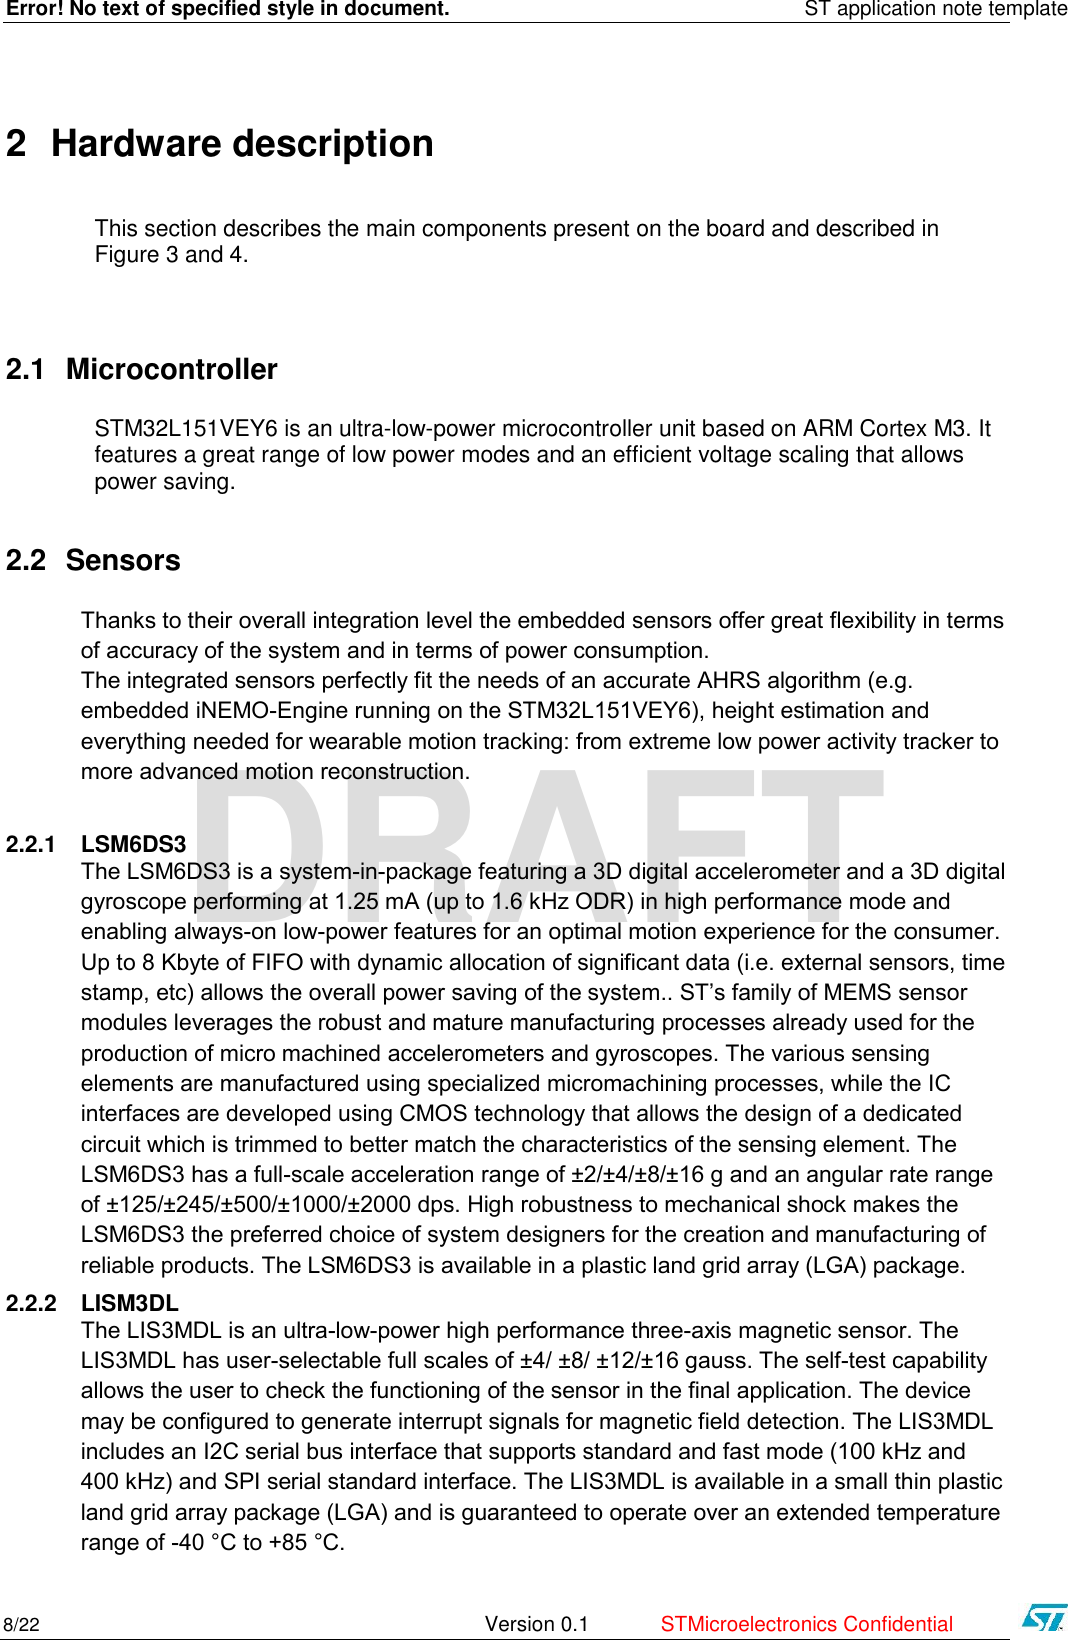 Error! No text of specified style in document.    ST application note template 8/22   Version 0.1  STMicroelectronics Confidential   DRAFT 2 Hardware description This section describes the main components present on the board and described in Figure 3 and 4.   2.1 Microcontroller STM32L151VEY6 is an ultra-low-power microcontroller unit based on ARM Cortex M3. It features a great range of low power modes and an efficient voltage scaling that allows power saving.  2.2 Sensors Thanks to their overall integration level the embedded sensors offer great flexibility in terms of accuracy of the system and in terms of power consumption.  The integrated sensors perfectly fit the needs of an accurate AHRS algorithm (e.g. embedded iNEMO-Engine running on the STM32L151VEY6), height estimation and everything needed for wearable motion tracking: from extreme low power activity tracker to more advanced motion reconstruction.   2.2.1 LSM6DS3 The LSM6DS3 is a system-in-package featuring a 3D digital accelerometer and a 3D digital gyroscope performing at 1.25 mA (up to 1.6 kHz ODR) in high performance mode and enabling always-on low-power features for an optimal motion experience for the consumer.  Up to 8 Kbyte of FIFO with dynamic allocation of significant data (i.e. external sensors, time stamp, etc) allows the overall power saving of the system.. ST’s family of MEMS sensor modules leverages the robust and mature manufacturing processes already used for the production of micro machined accelerometers and gyroscopes. The various sensing elements are manufactured using specialized micromachining processes, while the IC interfaces are developed using CMOS technology that allows the design of a dedicated circuit which is trimmed to better match the characteristics of the sensing element. The LSM6DS3 has a full-scale acceleration range of ±2/±4/±8/±16 g and an angular rate range of ±125/±245/±500/±1000/±2000 dps. High robustness to mechanical shock makes the LSM6DS3 the preferred choice of system designers for the creation and manufacturing of reliable products. The LSM6DS3 is available in a plastic land grid array (LGA) package. 2.2.2 LISM3DL The LIS3MDL is an ultra-low-power high performance three-axis magnetic sensor. The LIS3MDL has user-selectable full scales of ±4/ ±8/ ±12/±16 gauss. The self-test capability allows the user to check the functioning of the sensor in the final application. The device may be configured to generate interrupt signals for magnetic field detection. The LIS3MDL includes an I2C serial bus interface that supports standard and fast mode (100 kHz and 400 kHz) and SPI serial standard interface. The LIS3MDL is available in a small thin plastic land grid array package (LGA) and is guaranteed to operate over an extended temperature range of -40 °C to +85 °C. 